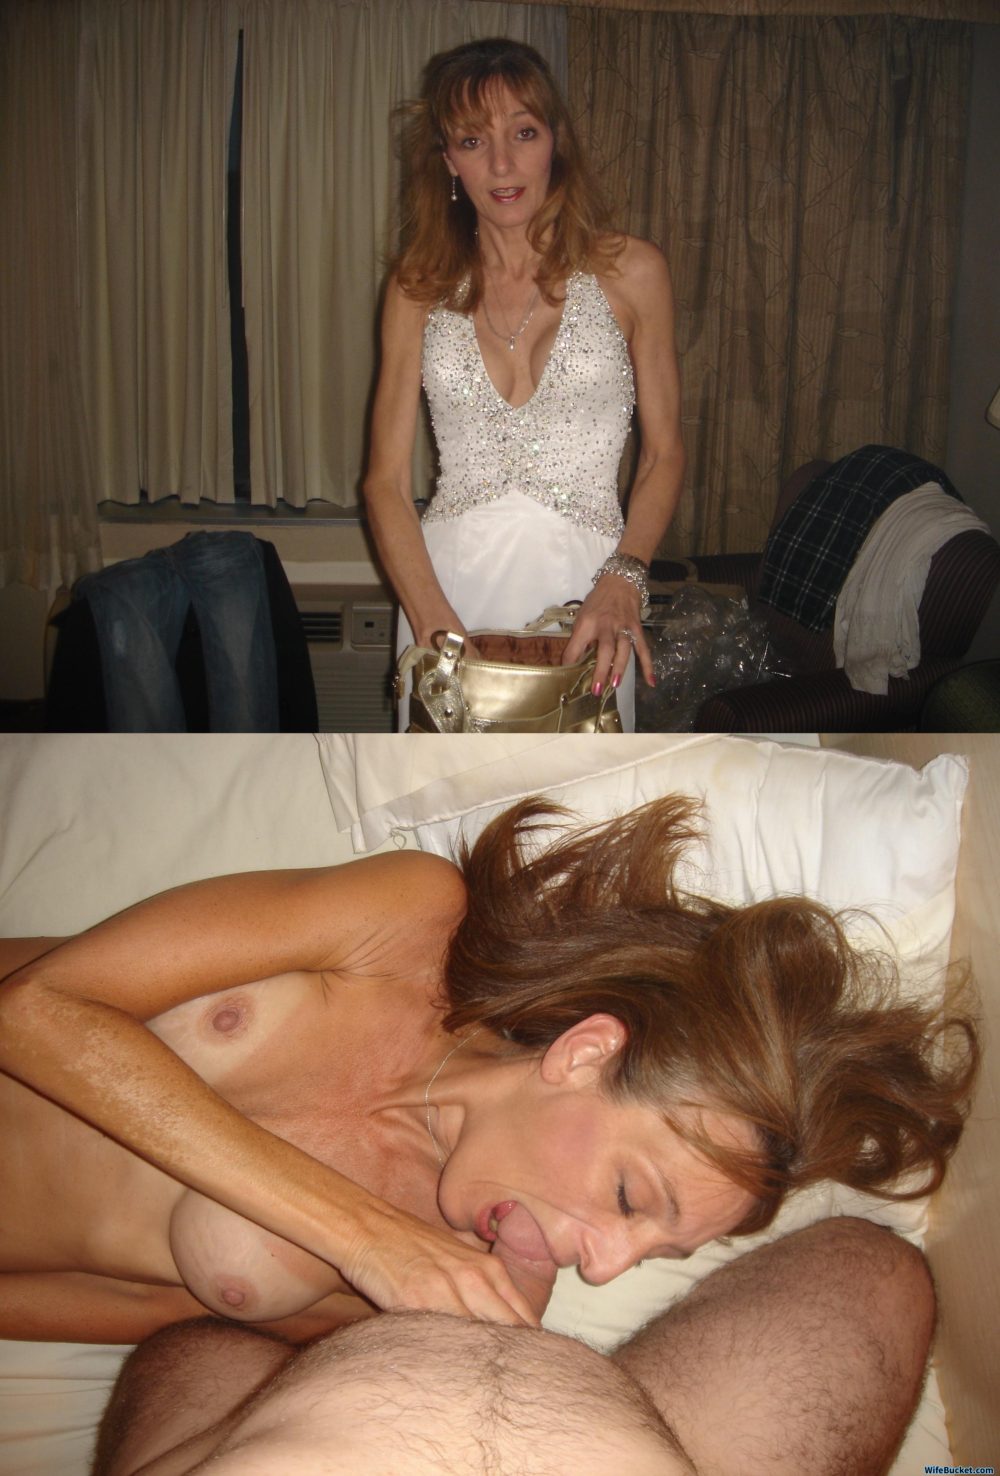 Hot MILF before-after blowjob